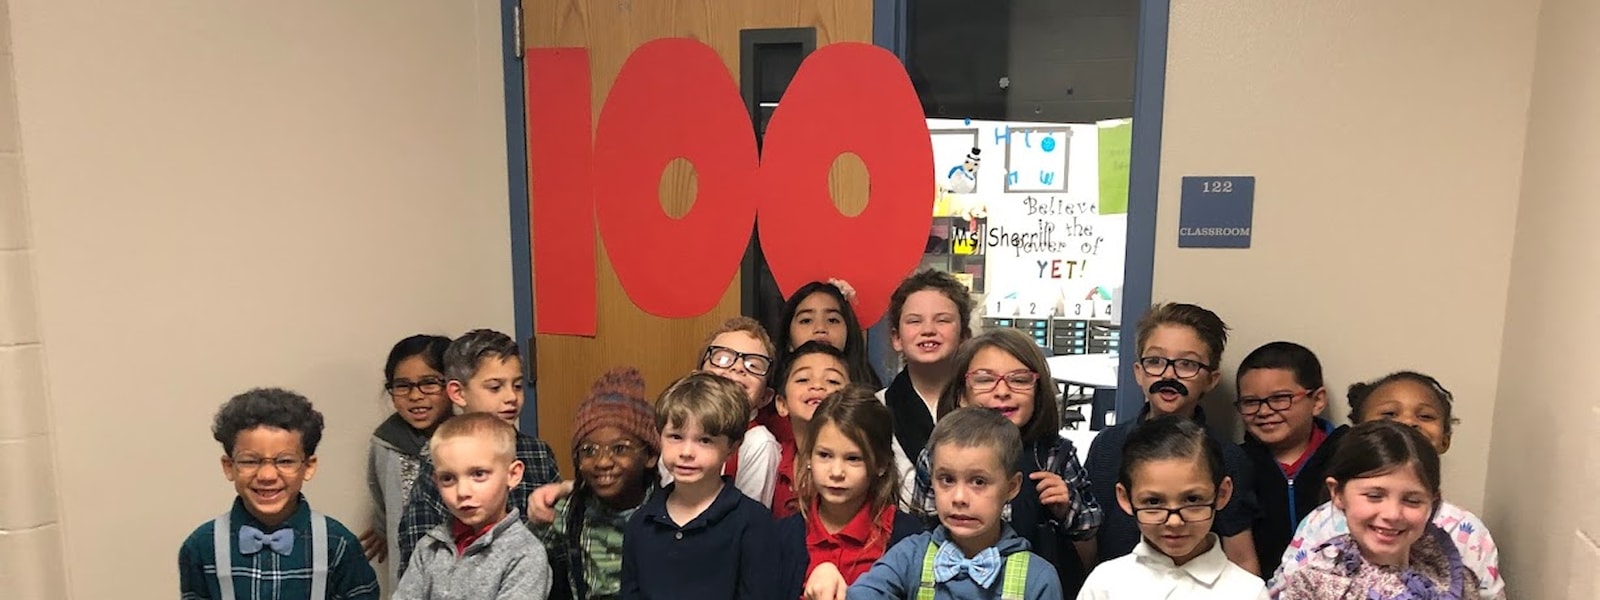 Kids dressed up for 100th day of school